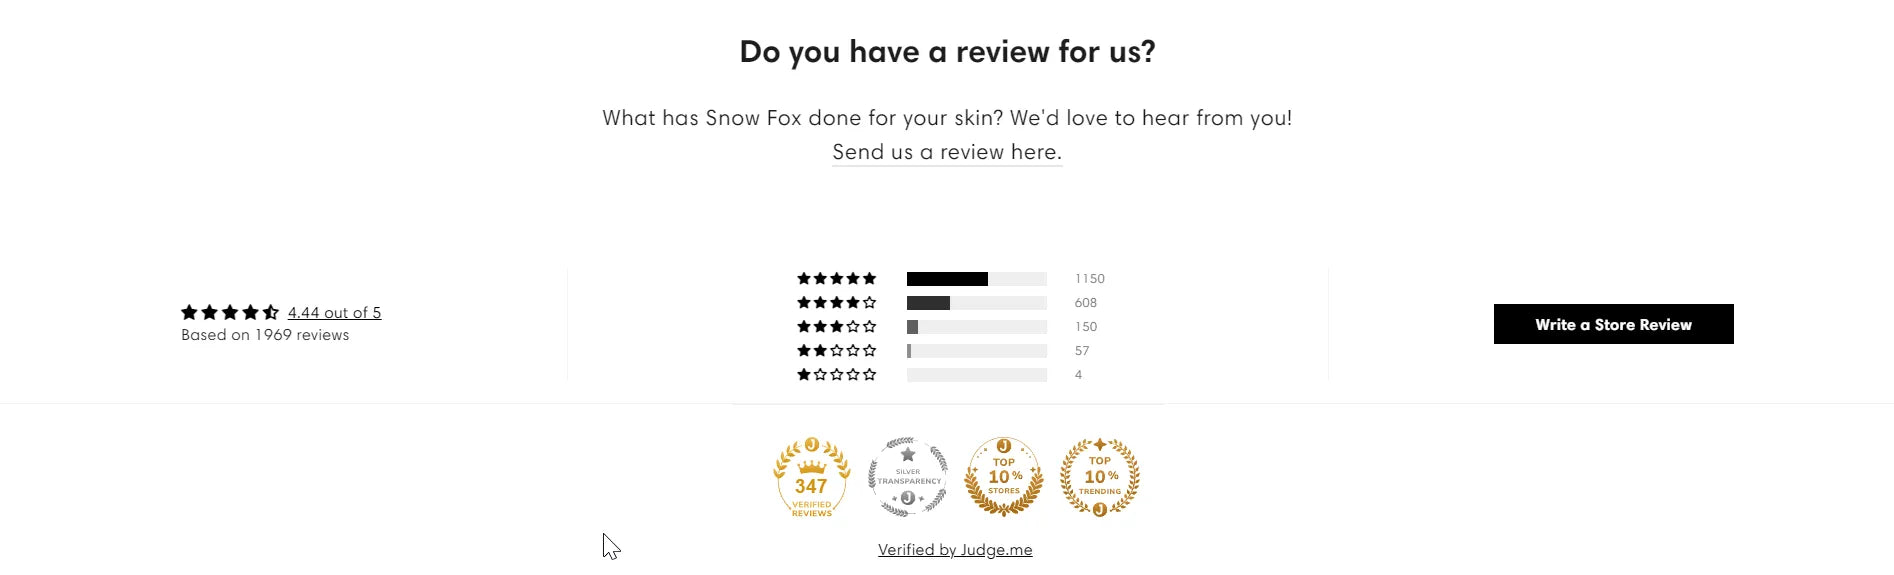 Snow Fox Skincare’s reviews and trust badges